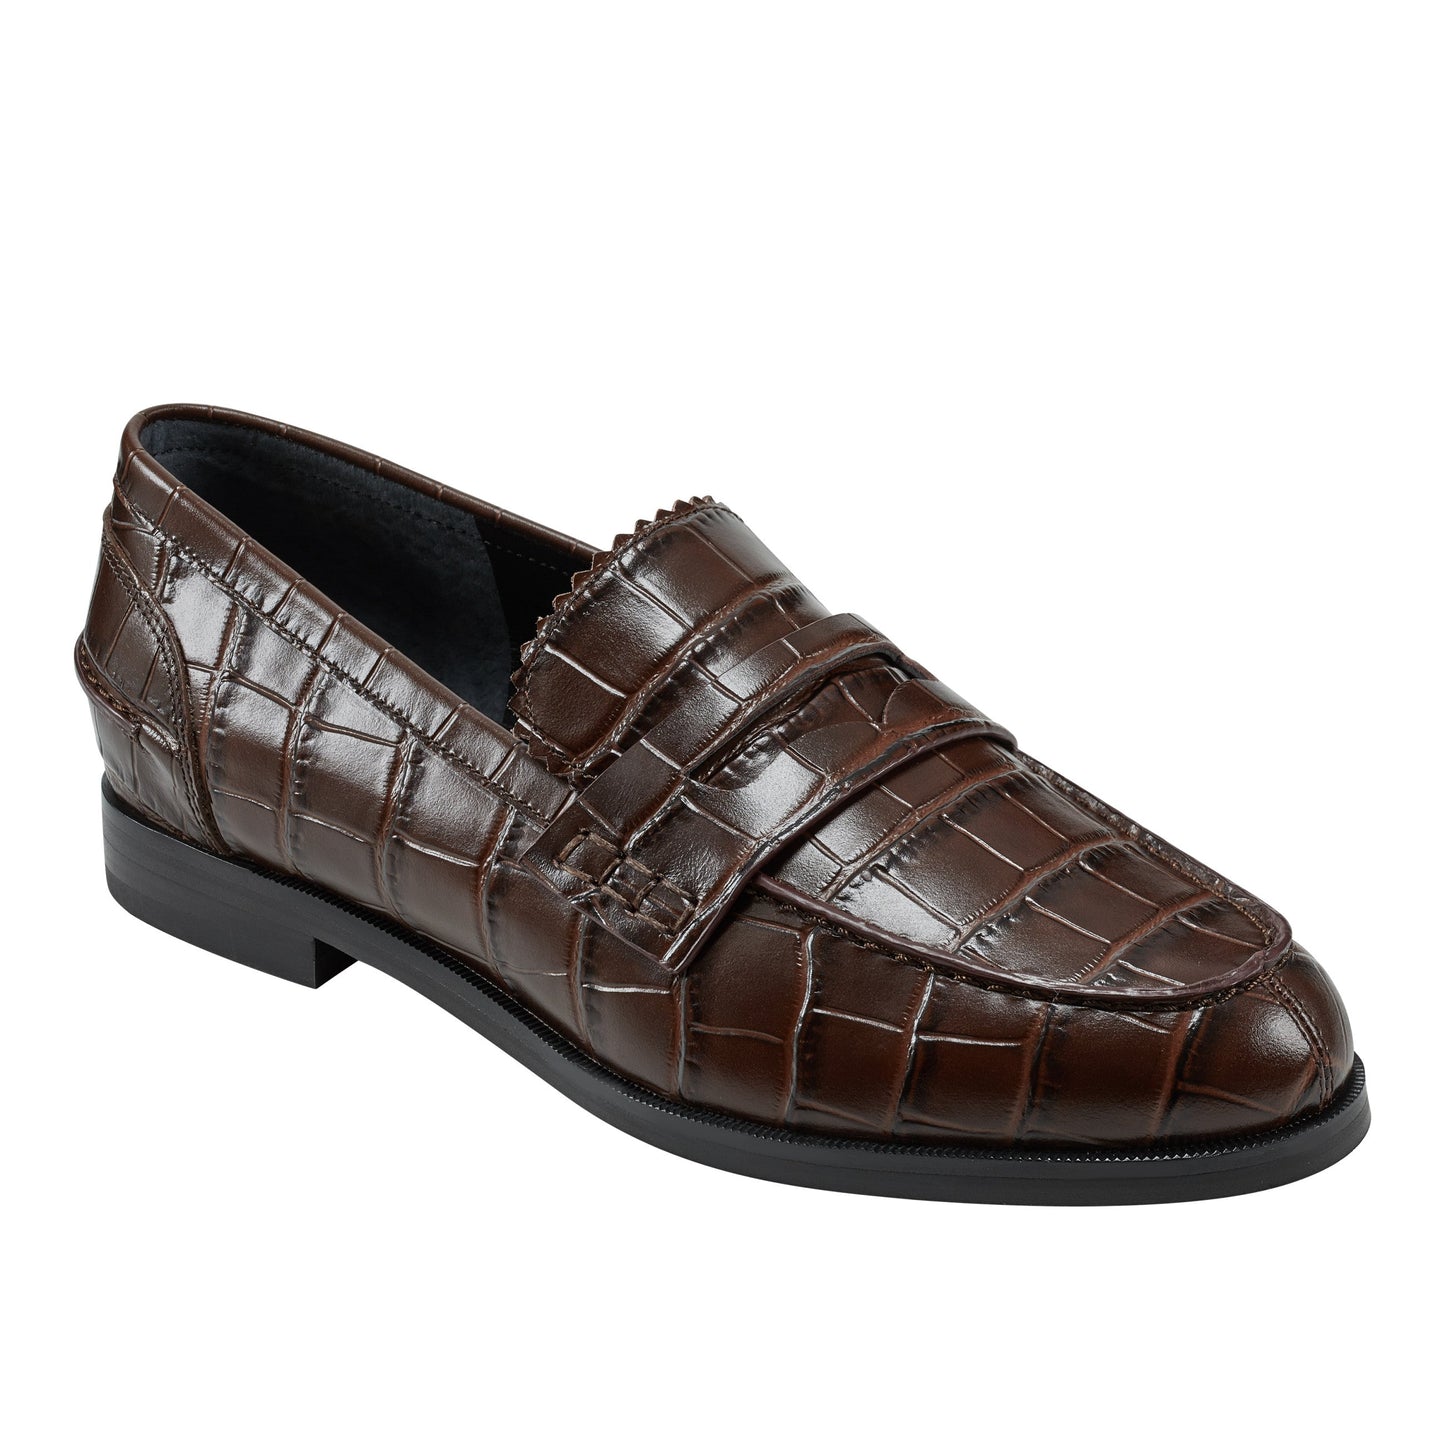 Load image into Gallery viewer, Milton Loafer - Muse Shoe Studio
